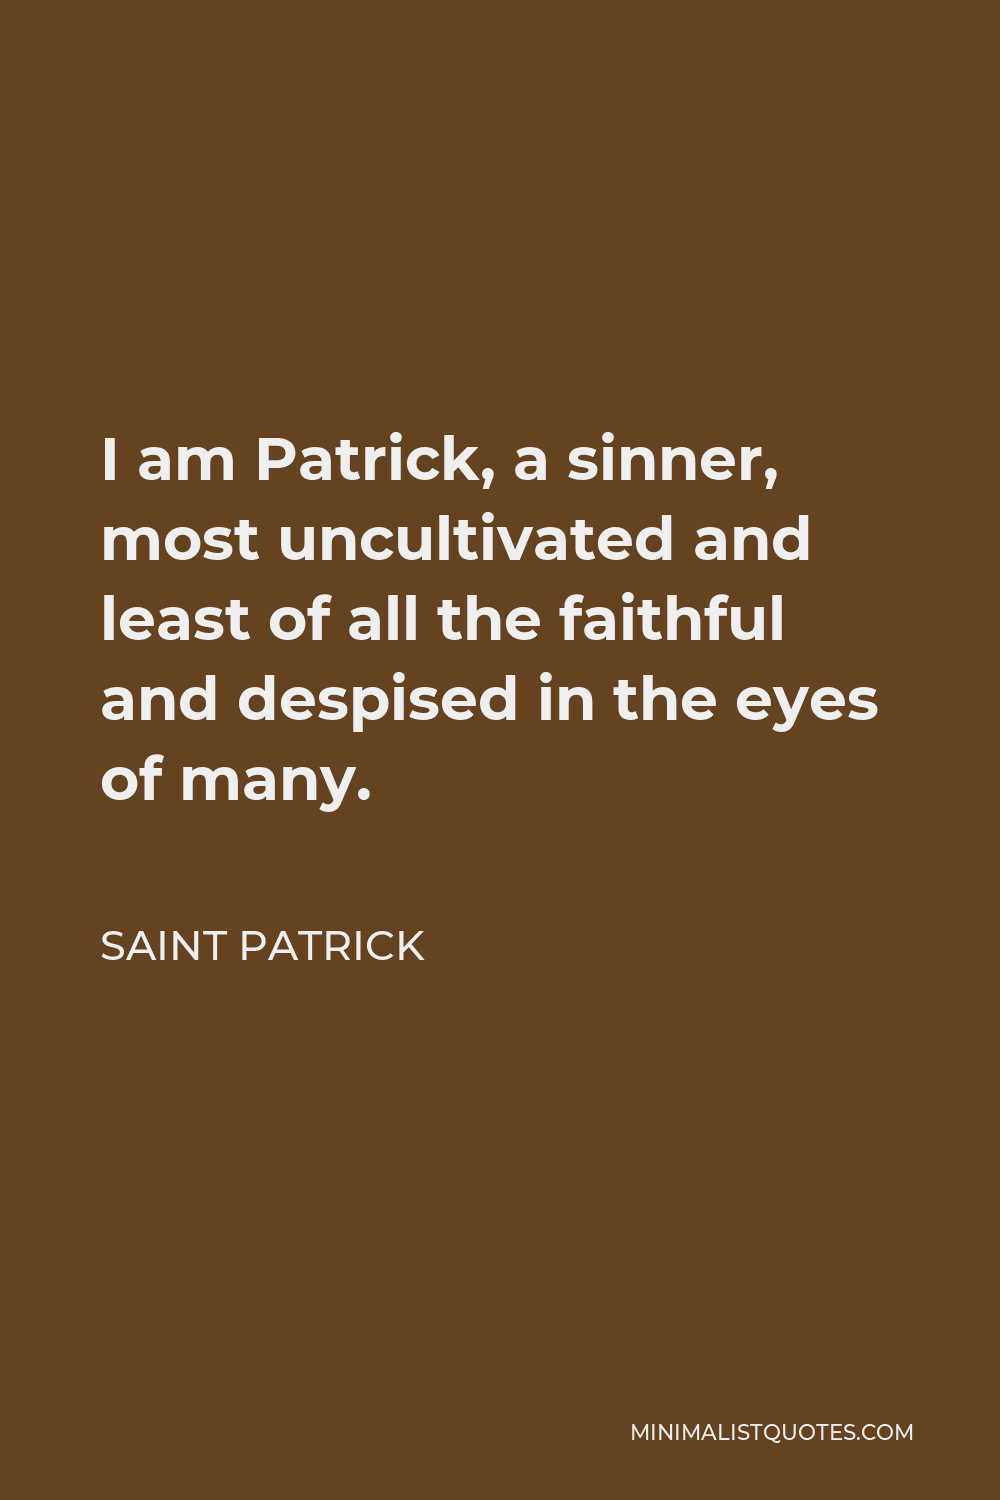 Saint Patrick Quote - I am Patrick, a sinner, most uncultivated and least of all the faithful and despised in the eyes of many.